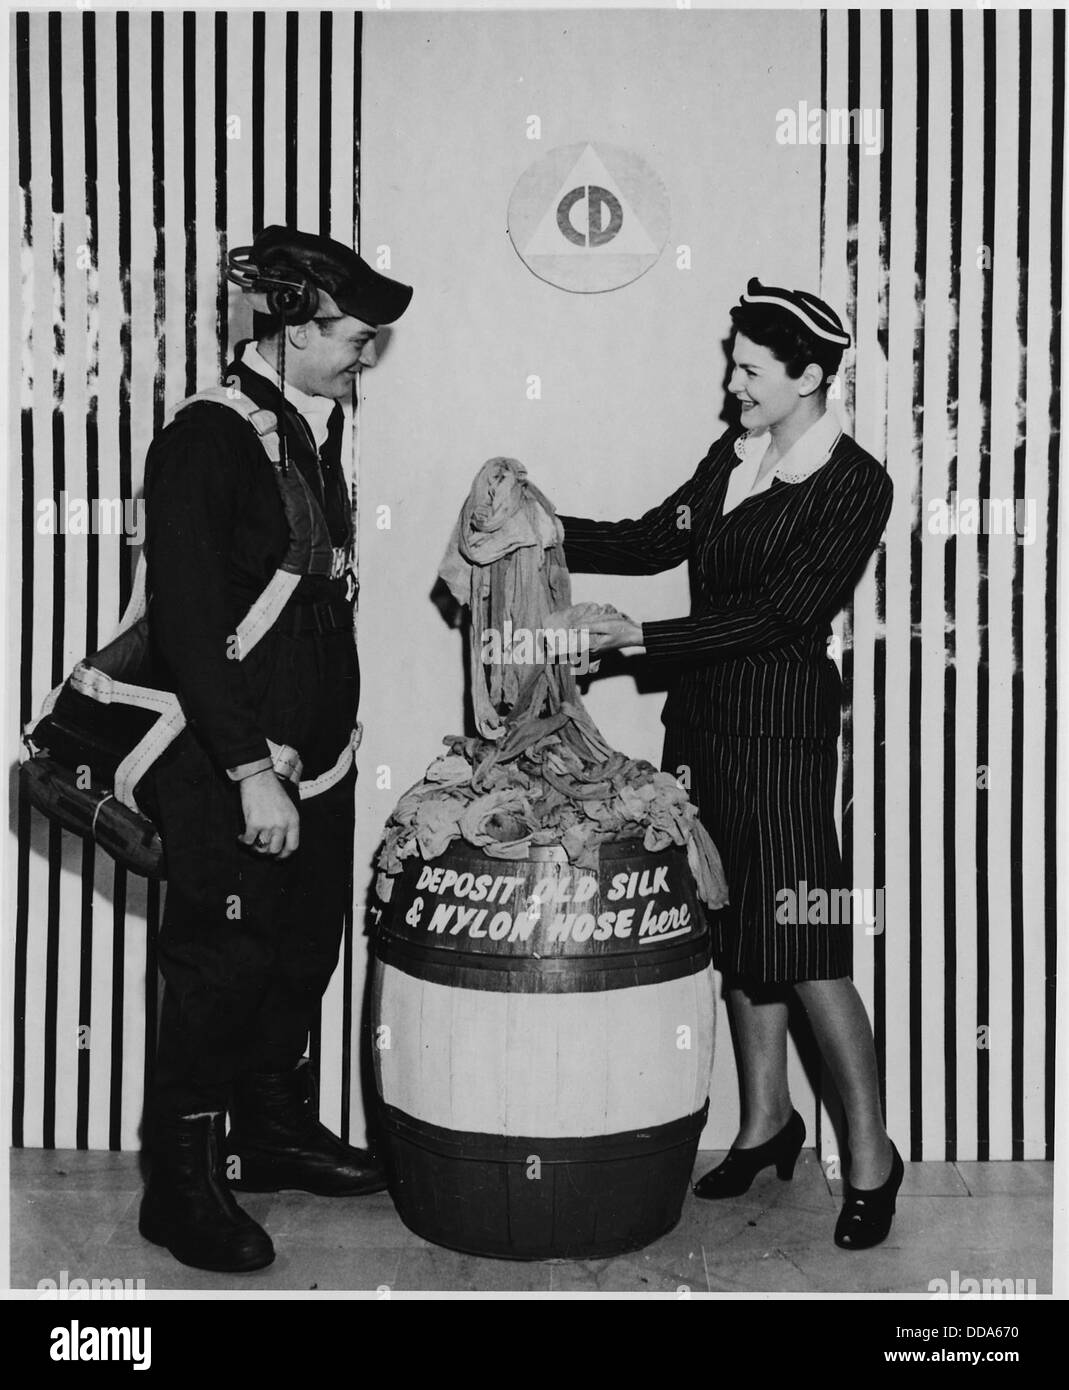 The worn out nylon stockings in this barrel full of salvaged stockings will be reprocessed and made into parachutes... - - 196427 Stock Photo